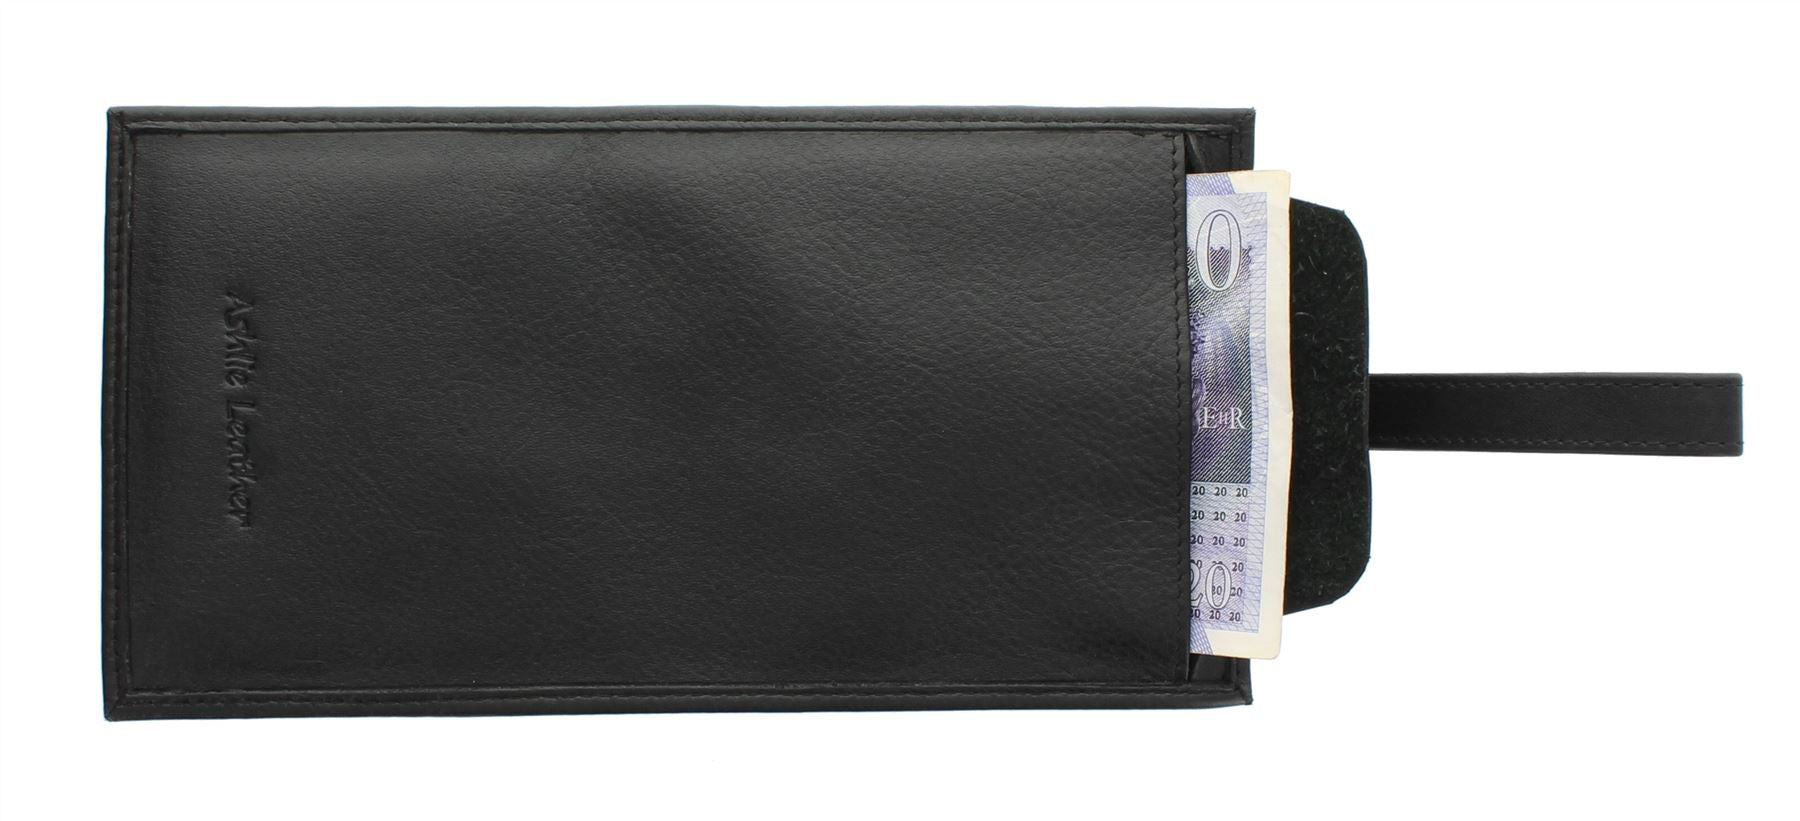 Genuine Leather Security Wallet Pouch With Belt Loop AC501